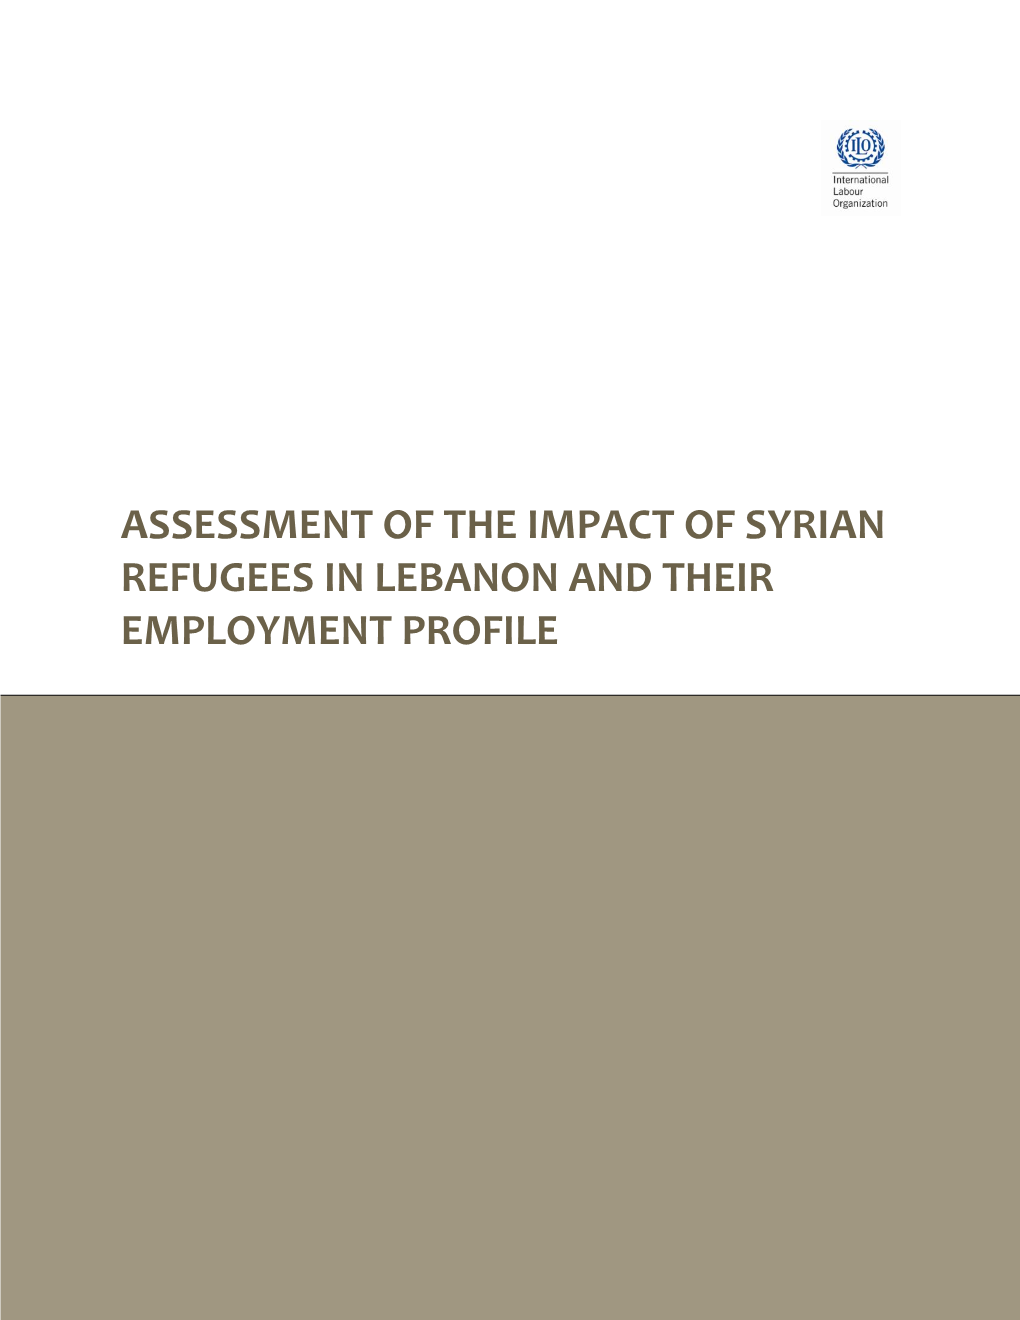 Assessment of the Impact of Syrian Refugees in Lebanon and Their Employment Profilepdf